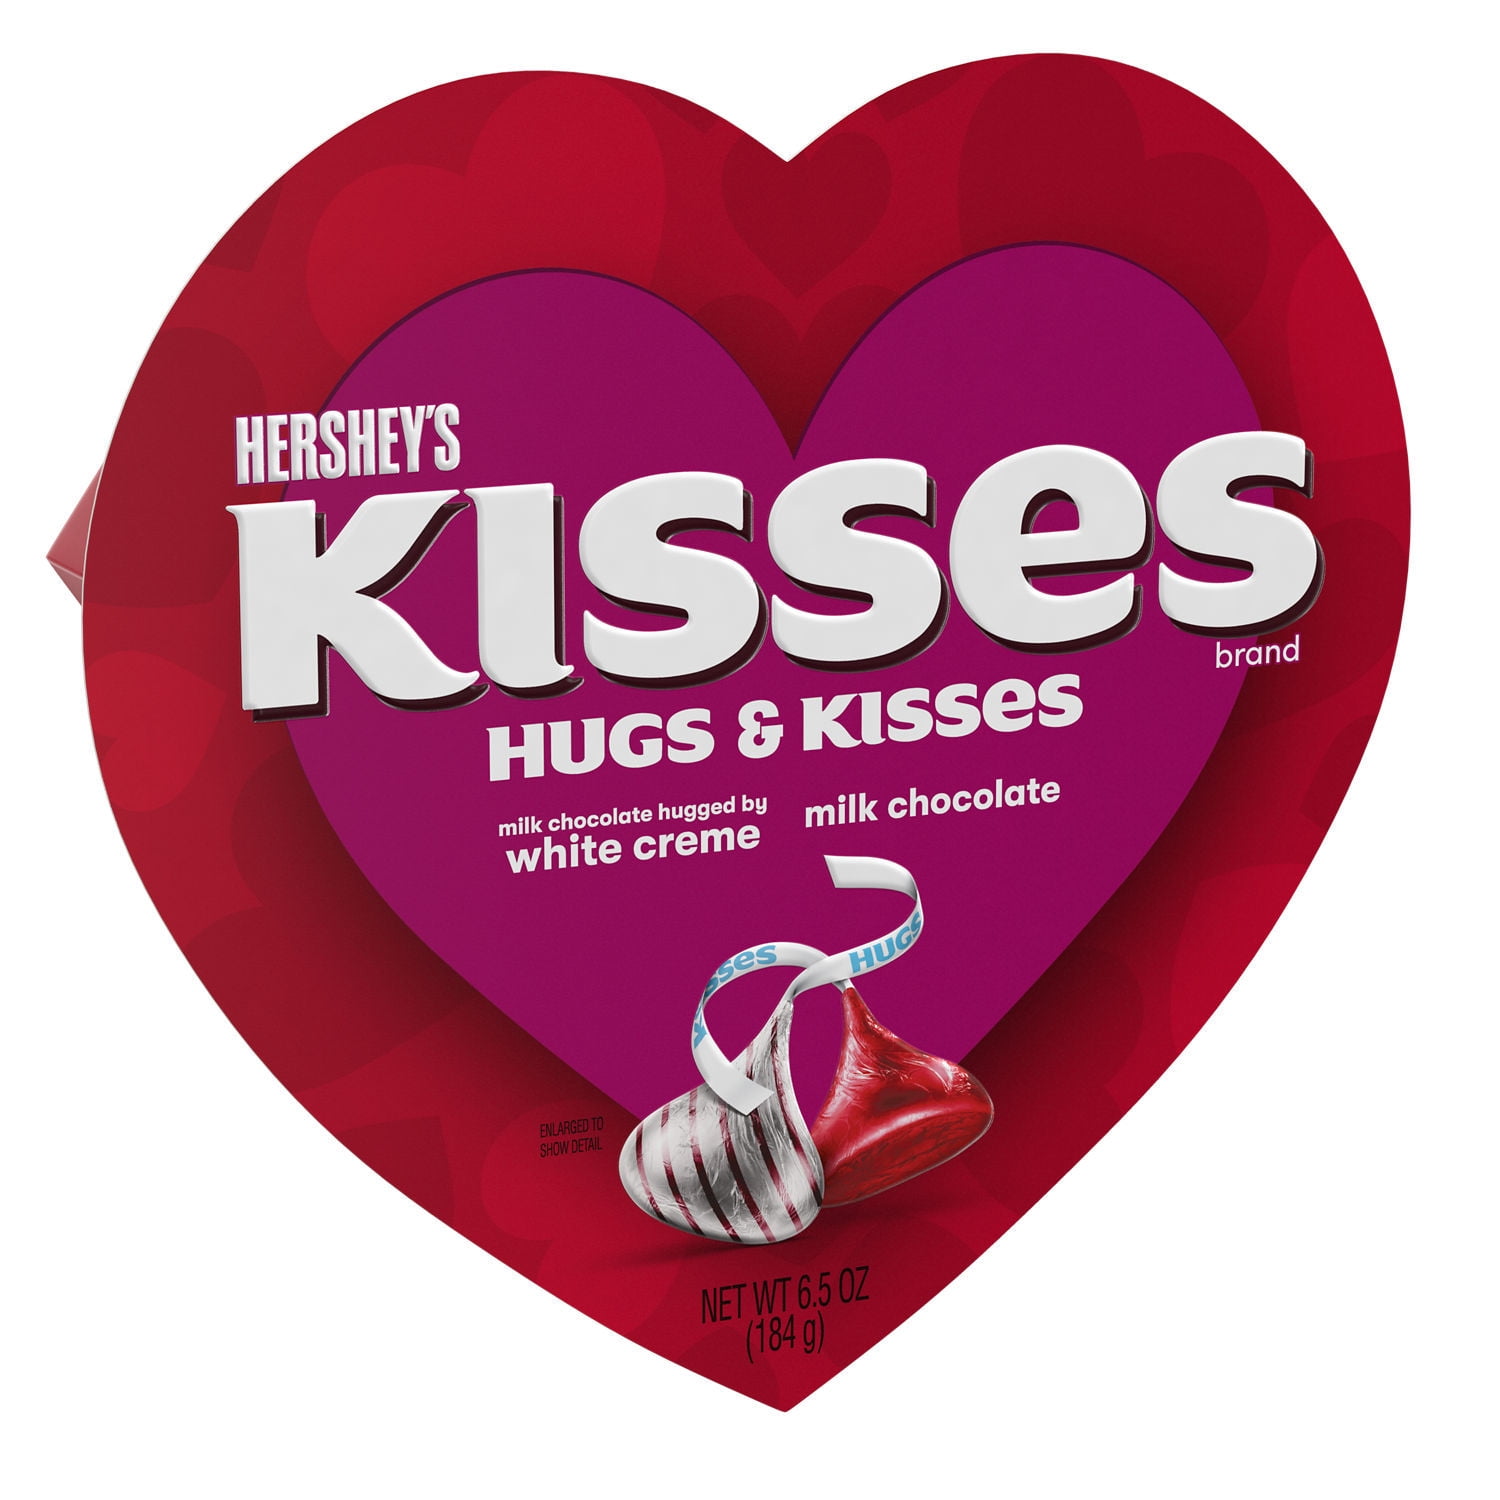 HERSHEY'S, HUGS and KISSES Assorted Milk Chocolate and White Creme Candy, Valentine's Day, 6.5 oz, Heart Gift Box